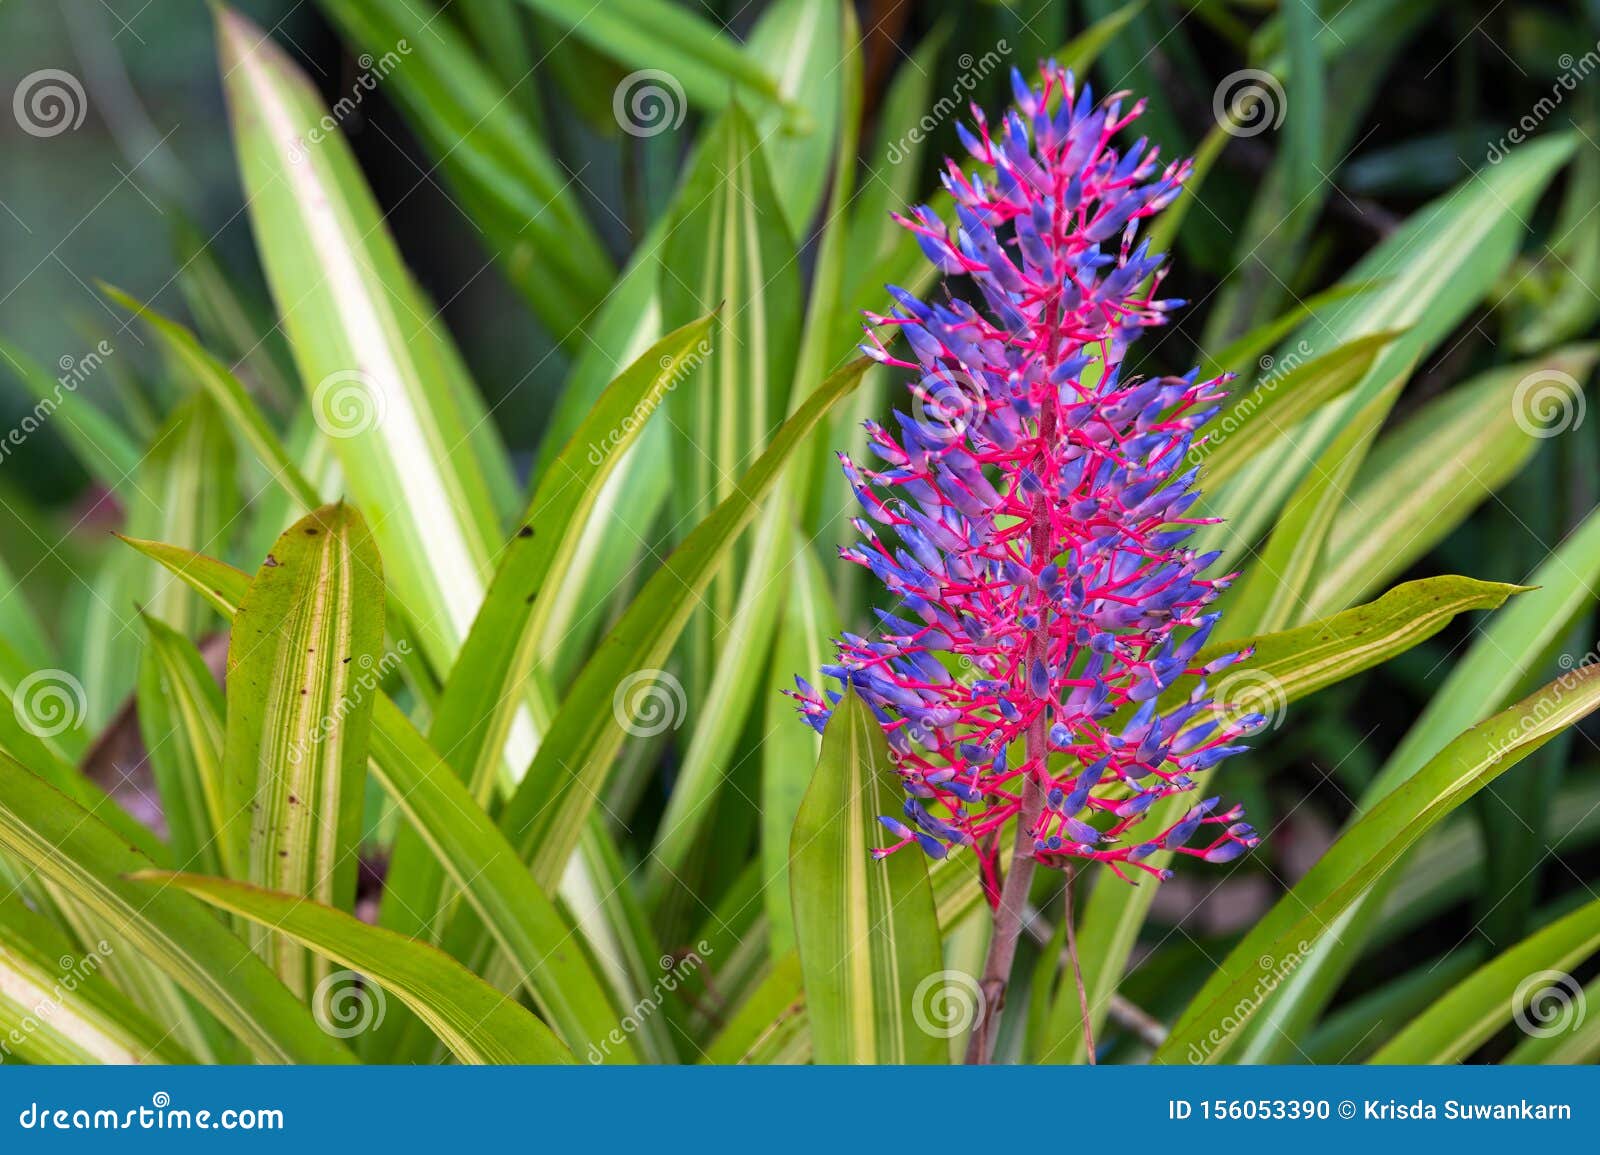 Purple of Aechmea Fasciata Flower with Leaves Stock Photo - Image of  bright, green: 156053390